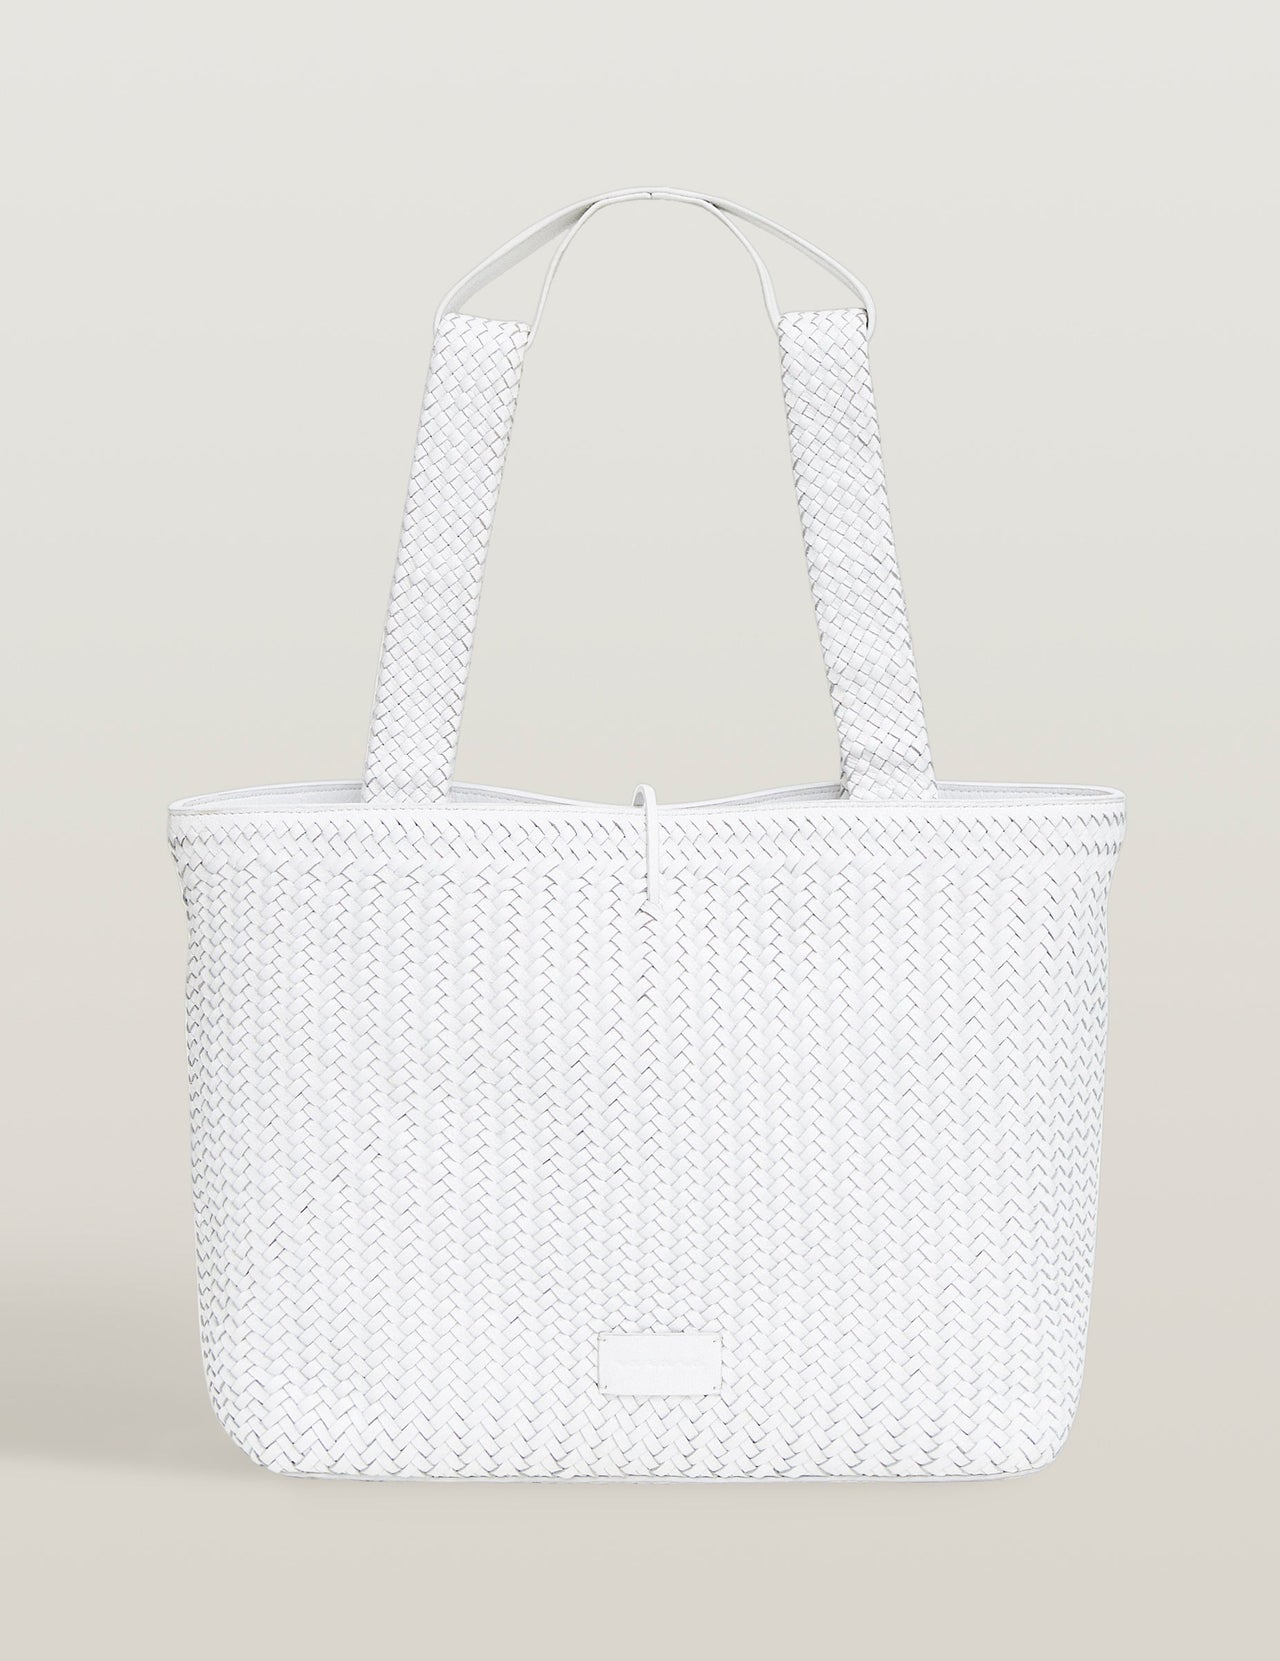  White Handwoven Leather Double Strap Tote Bag 